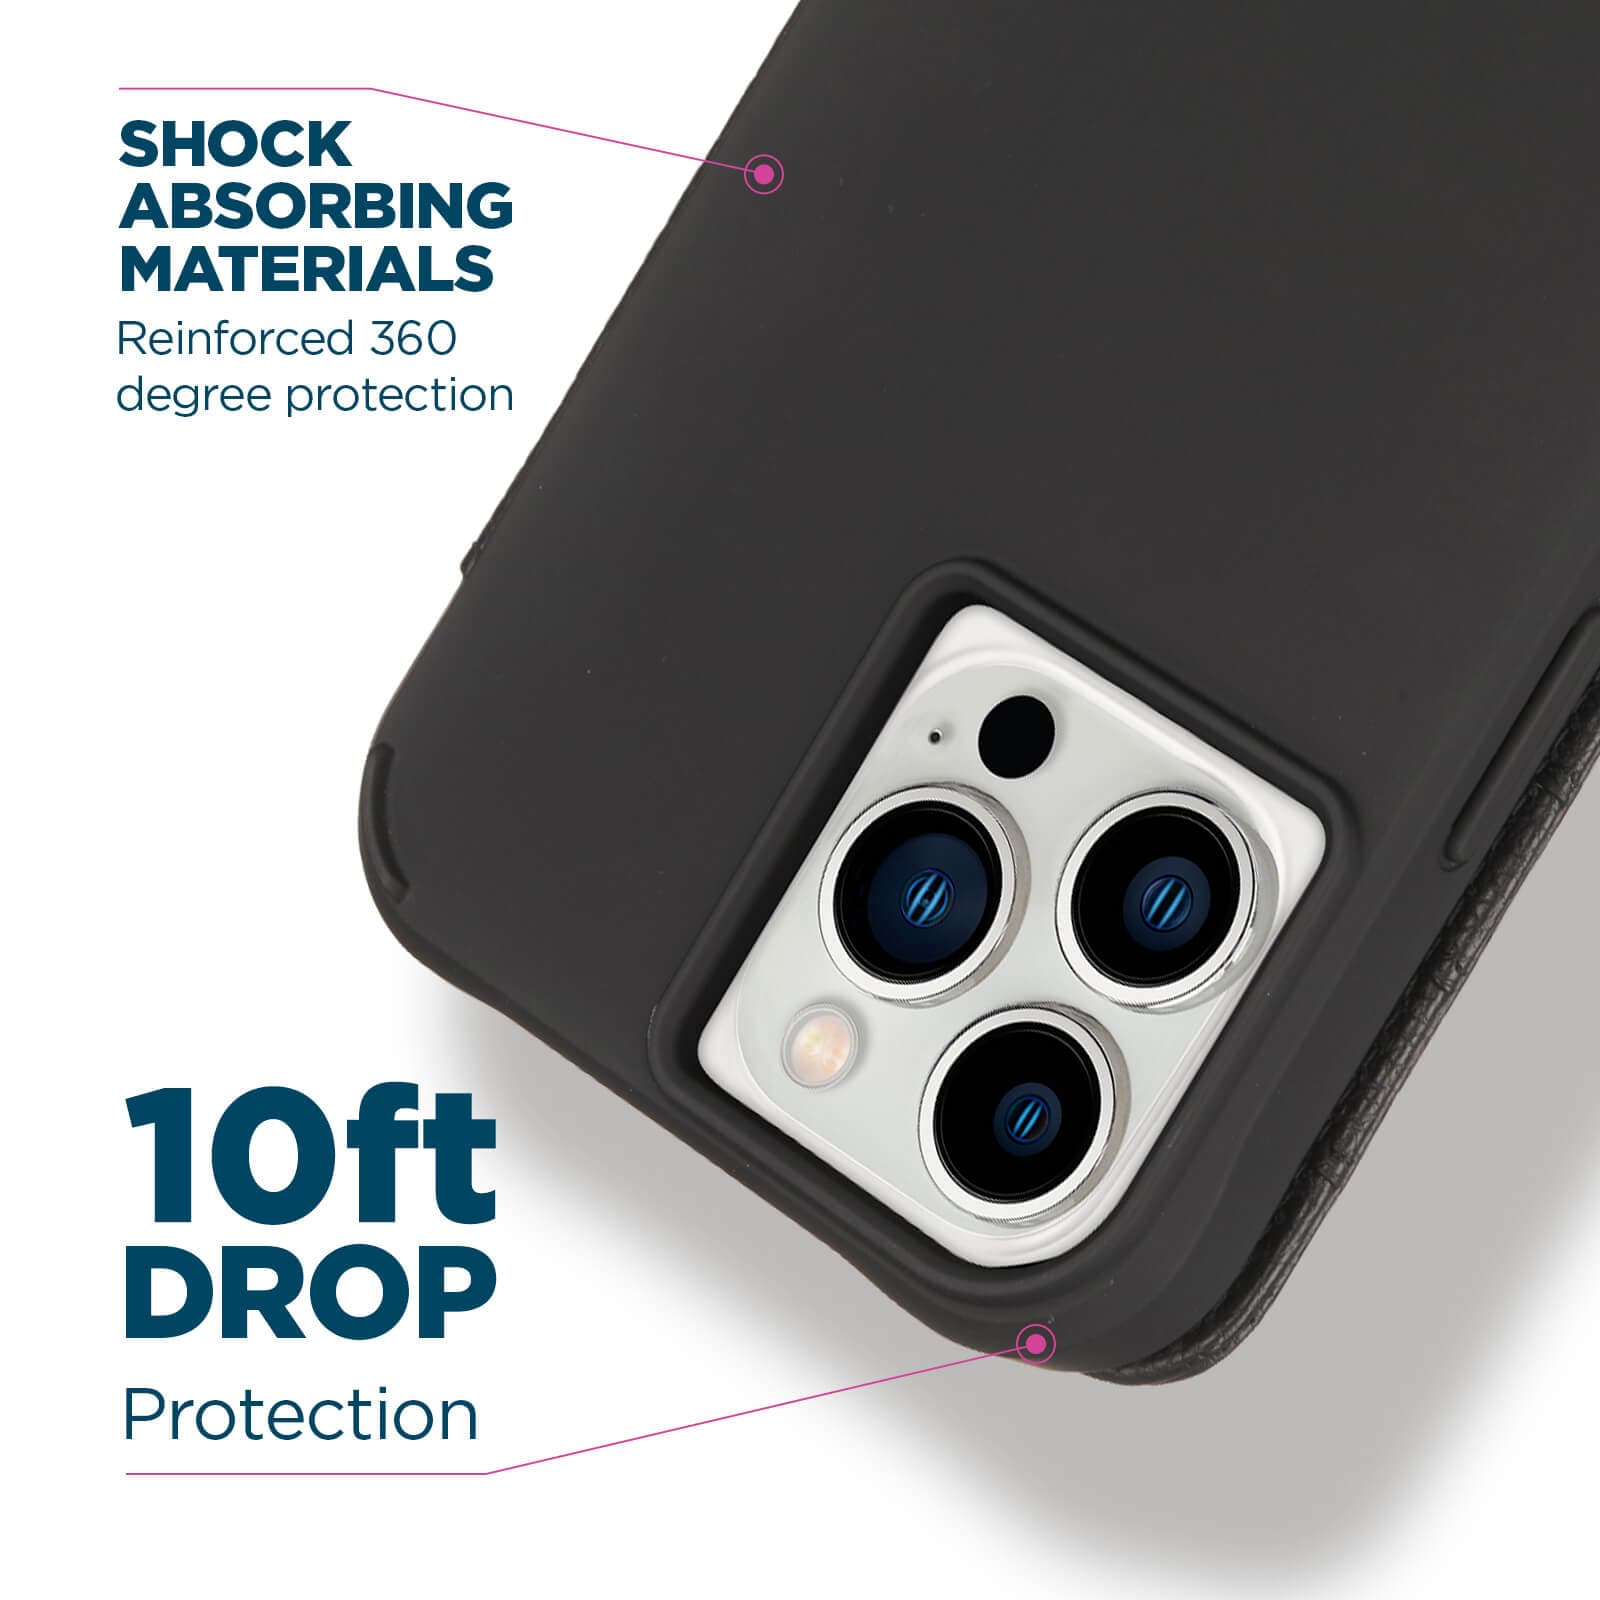 Shock absorbing materials reinforced 360 degree protection. 10ft drop protection. color::Black